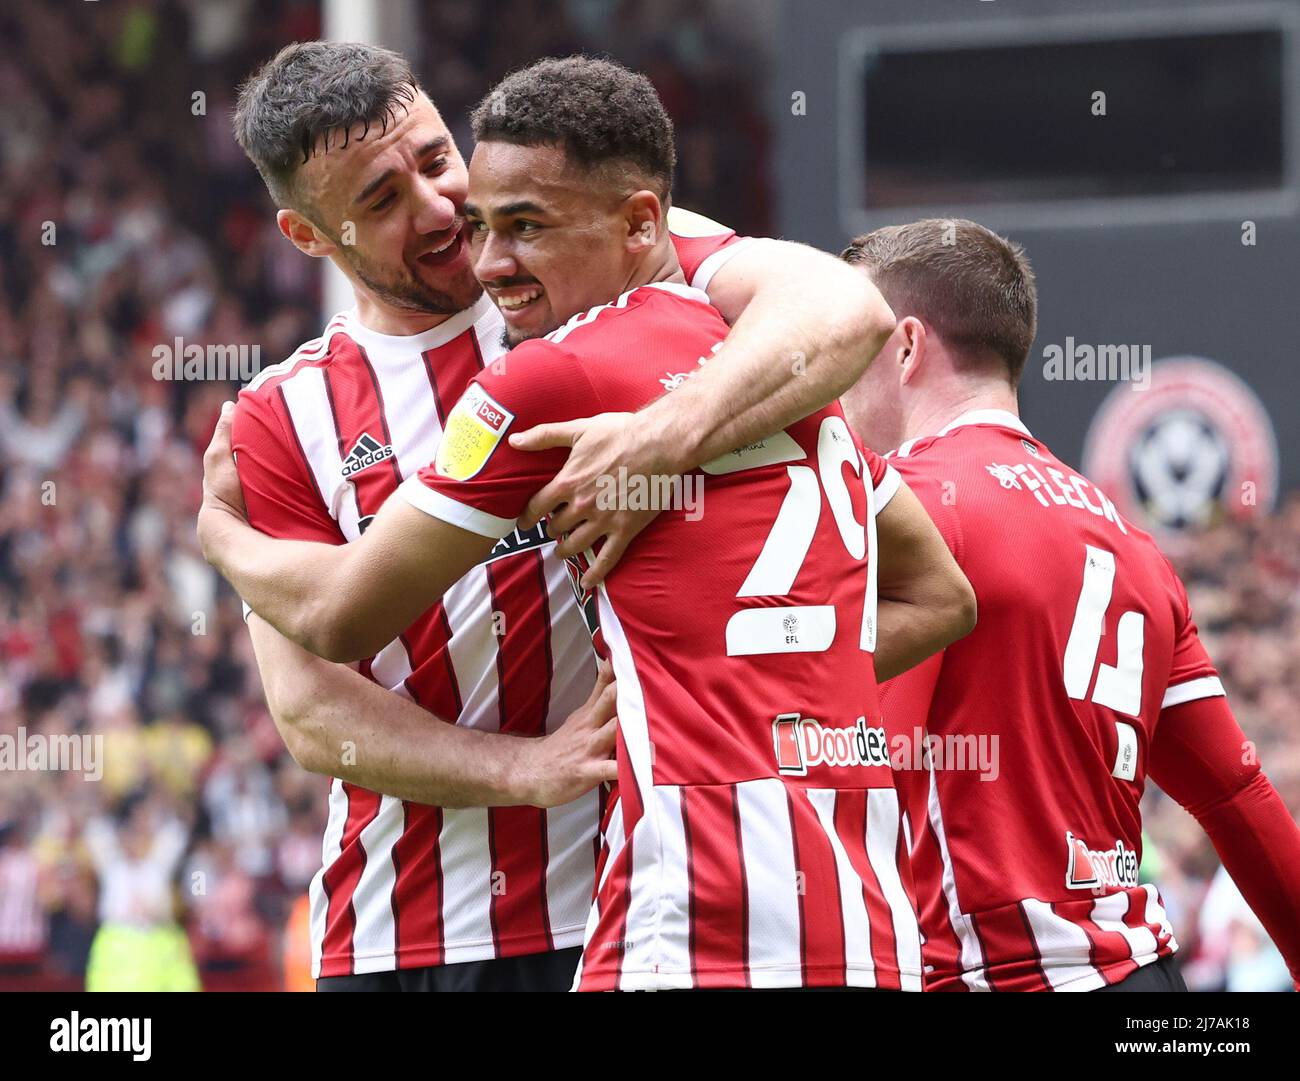 Sheffield, England, 7th May 2022.   lliman Ndiaye (C) of Sheffield Utd celebrates their second goal scored by Morgan Gibbs-White with Enda Stevens during the Sky Bet Championship match at Bramall Lane, Sheffield. Picture credit should read: Darren Staples / Sportimage Credit: Sportimage/Alamy Live News Stock Photo